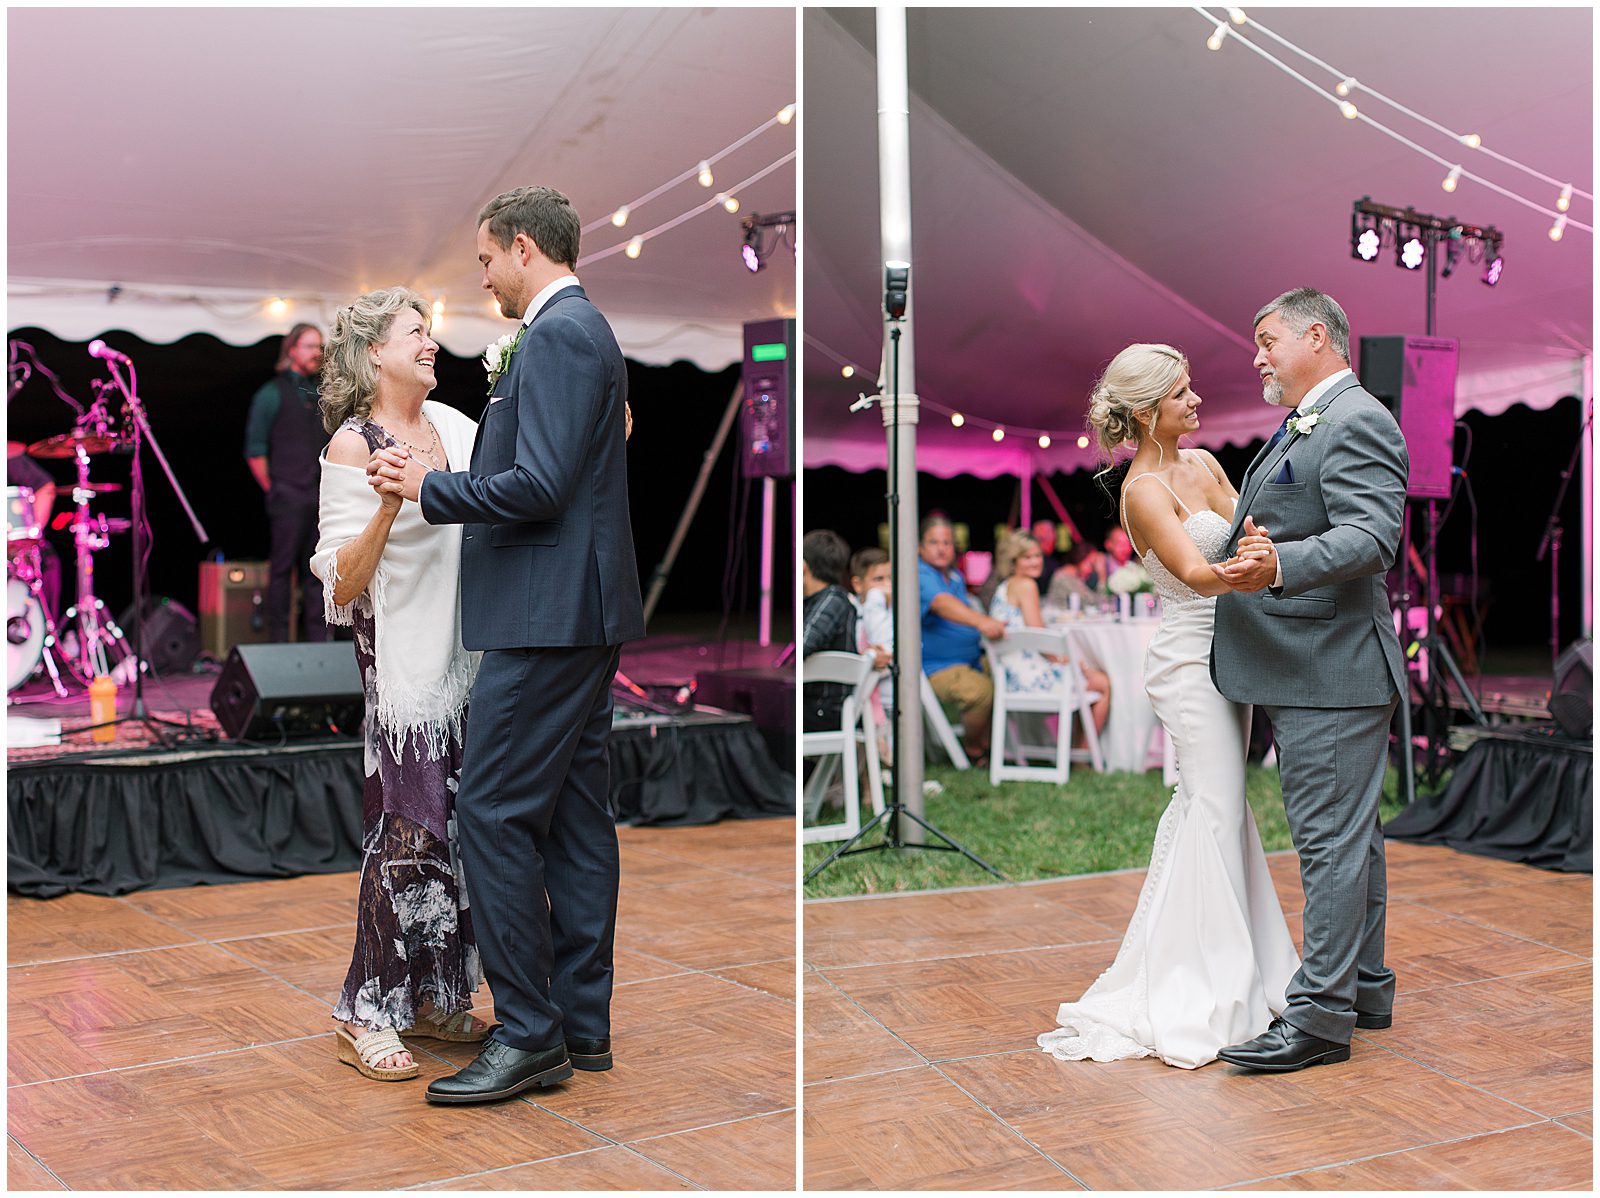 Groom Dancing with Mom and Bride Dancing with Dad Photos